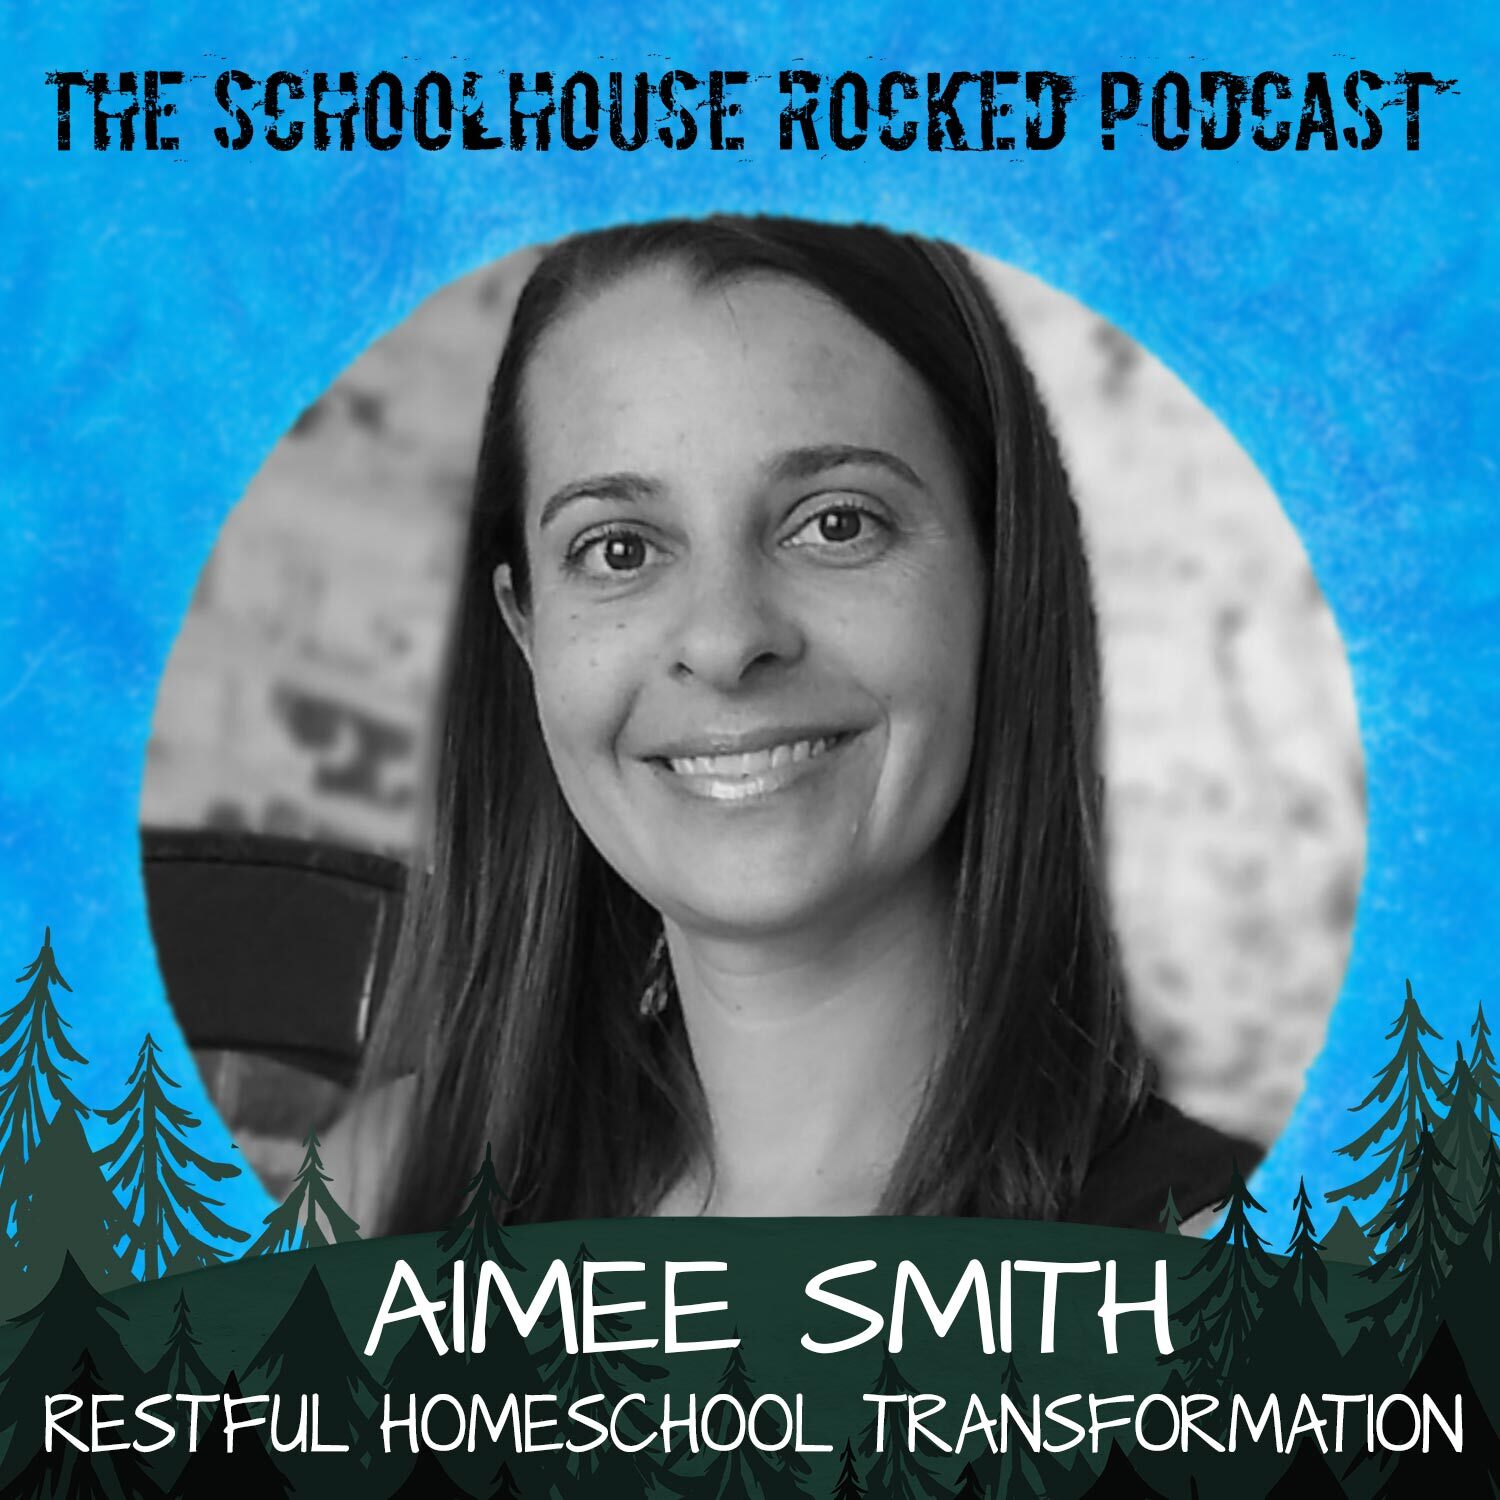 The Restful Homeschool Resolution: 21 Days to Transform Your Homeschool - Aimee Smith